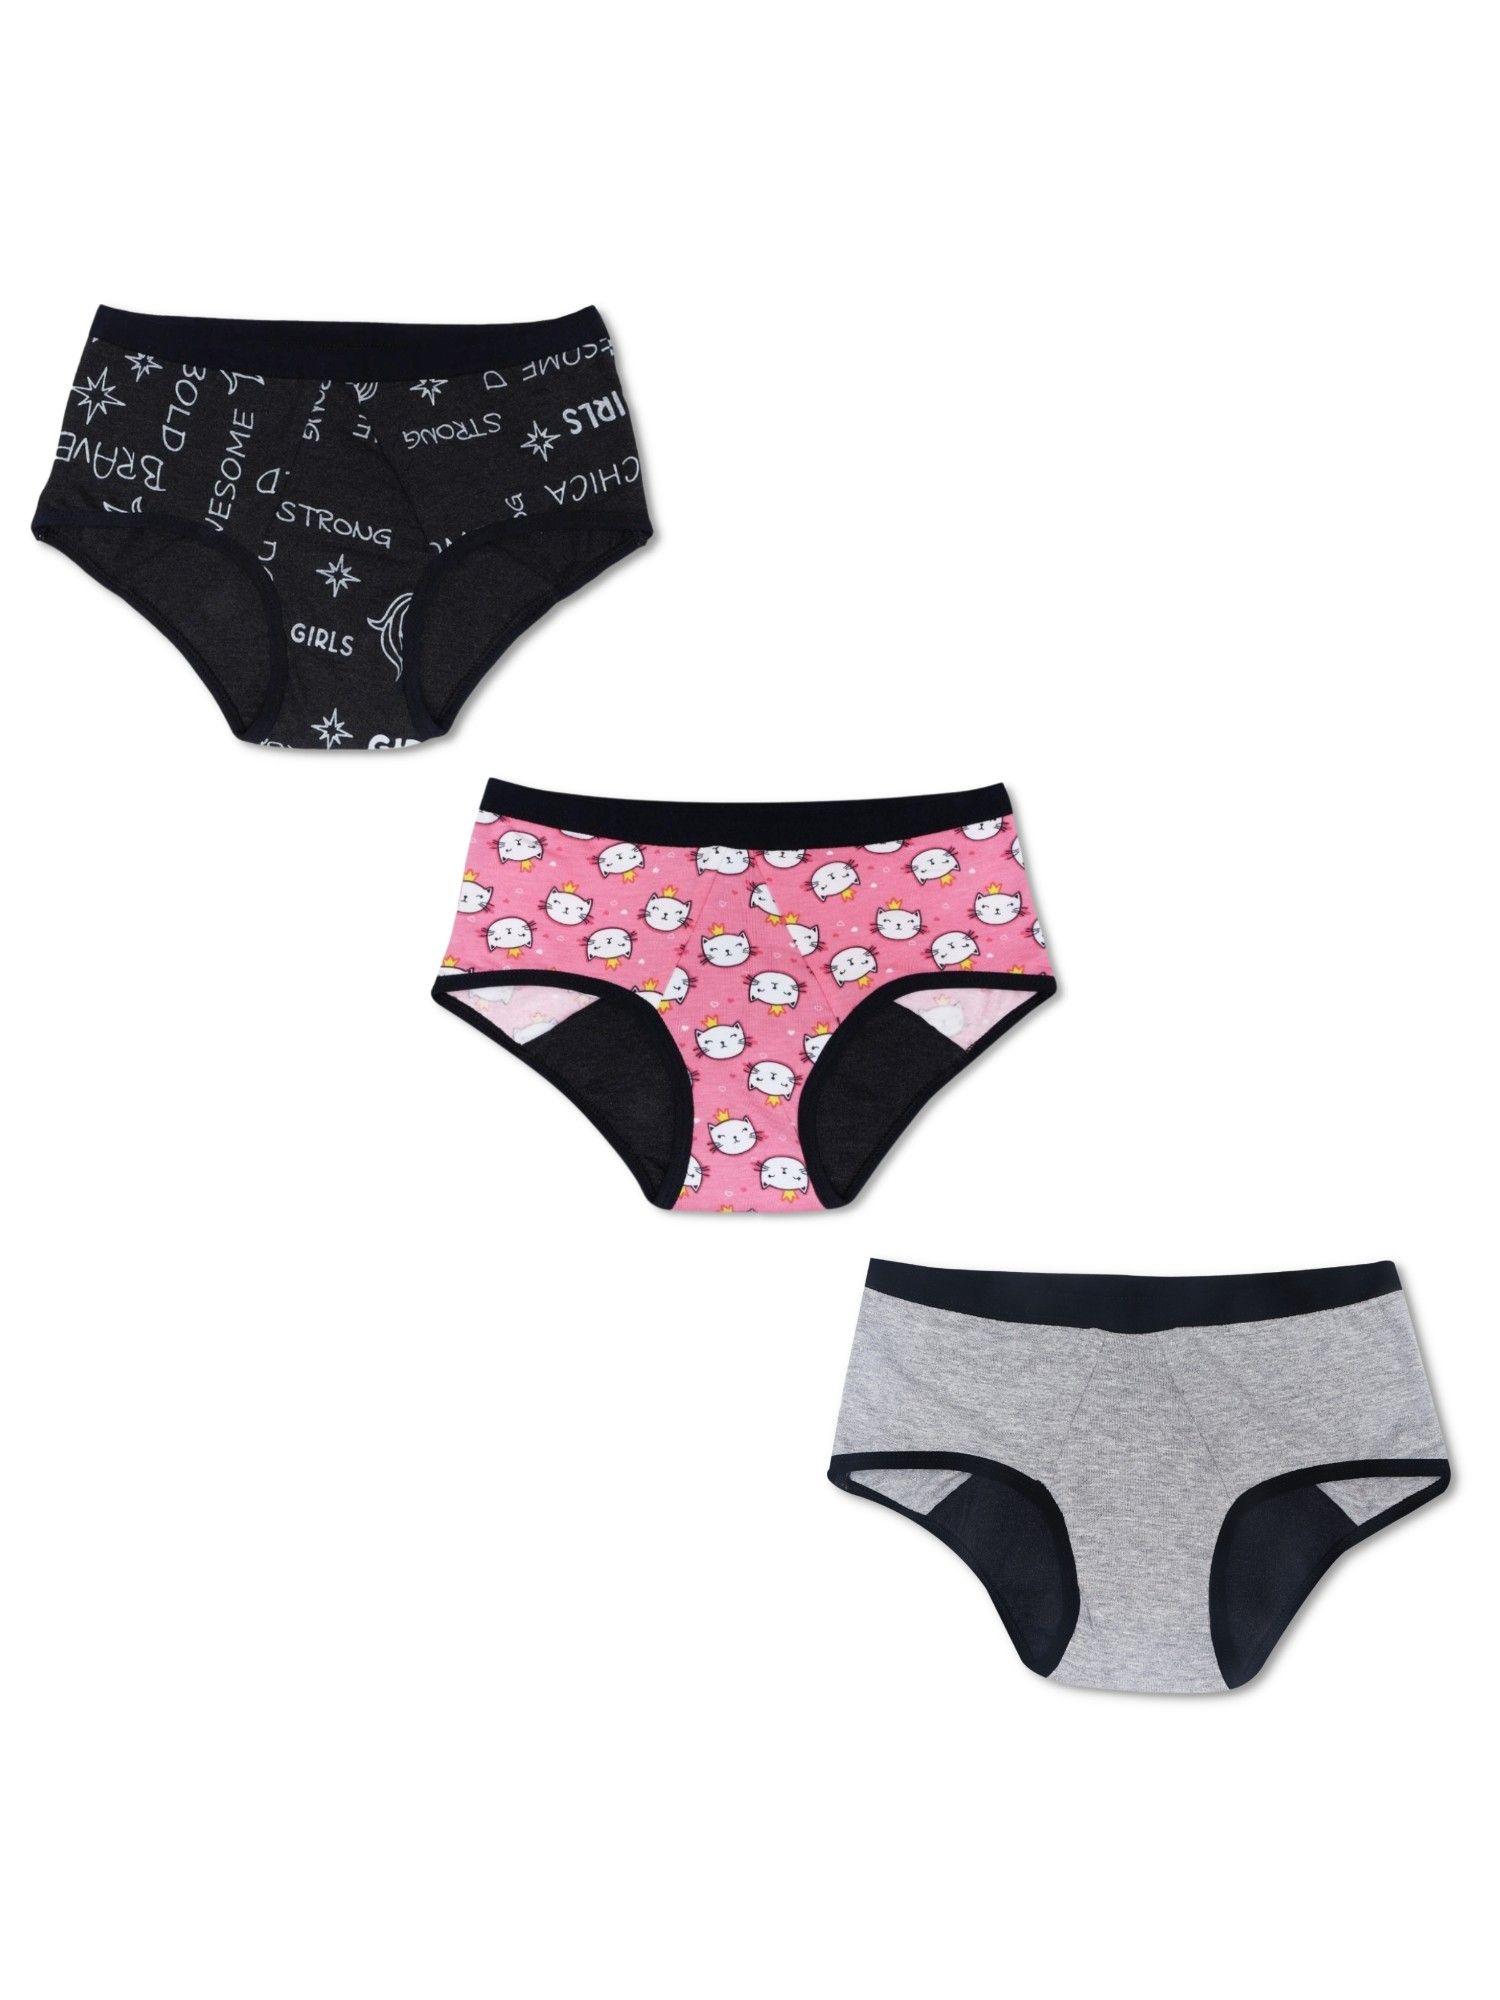 anti microbial period panties for girls-multi-color (pack of 3)